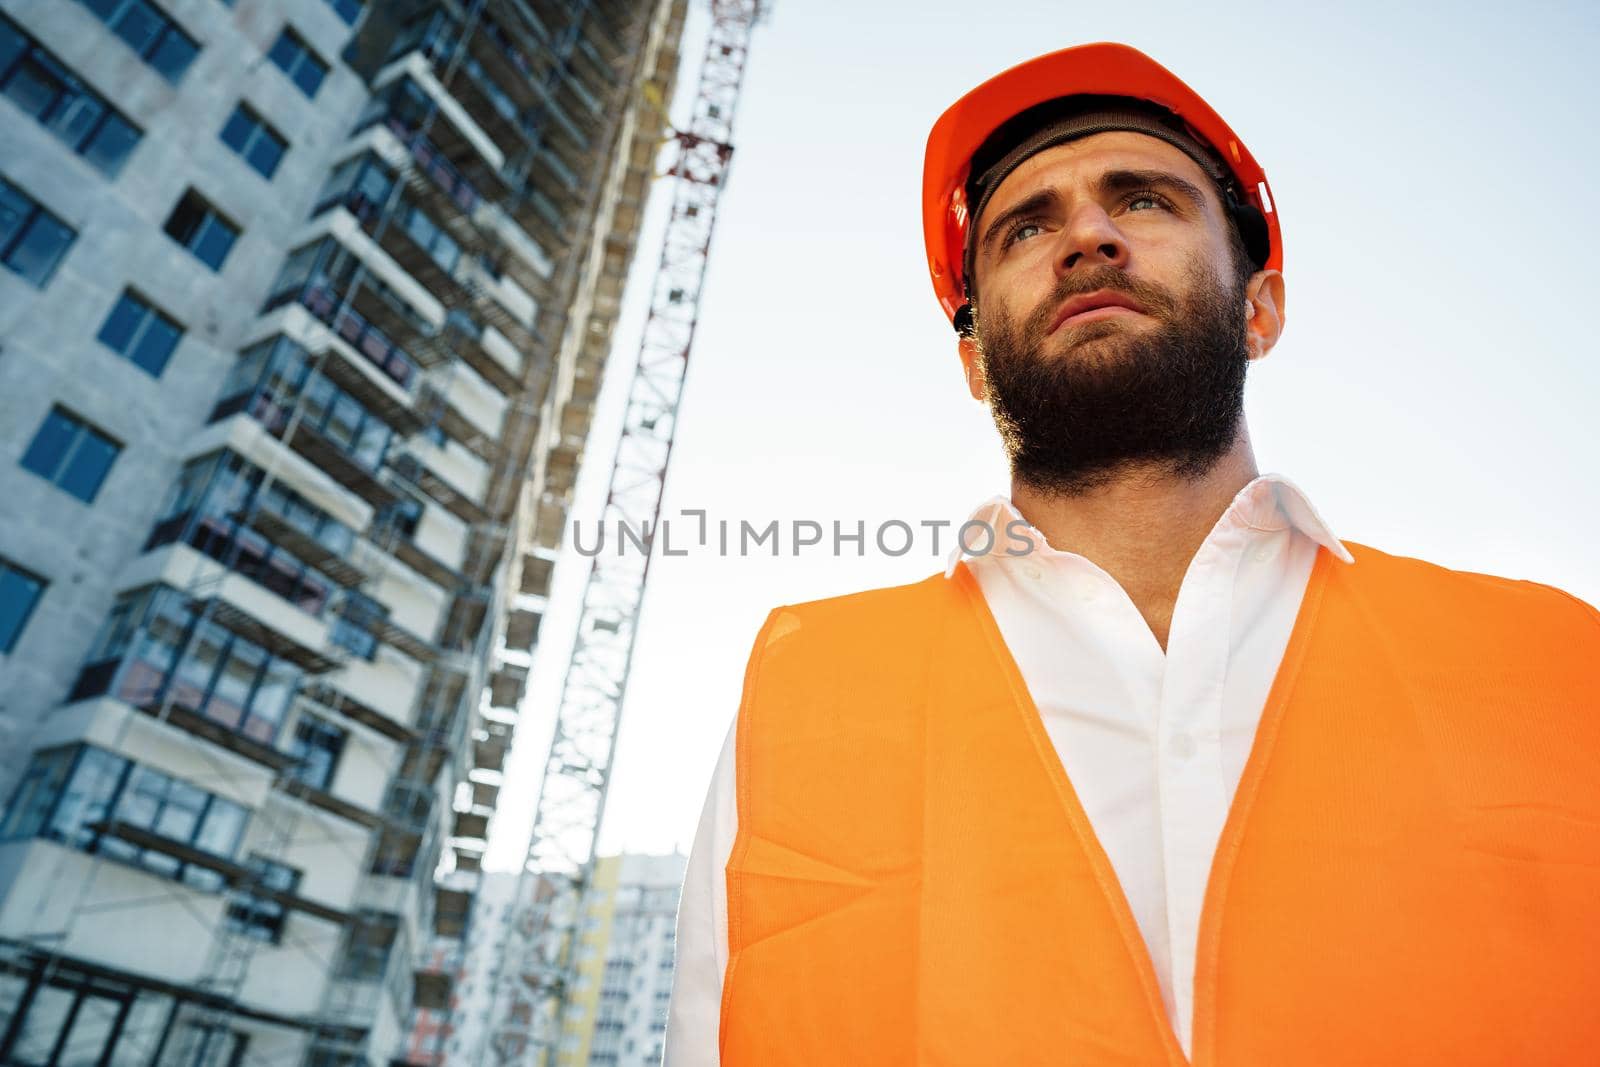 Builder wearing hardhat and safety vest standing on a commercial construction site, close up portrait